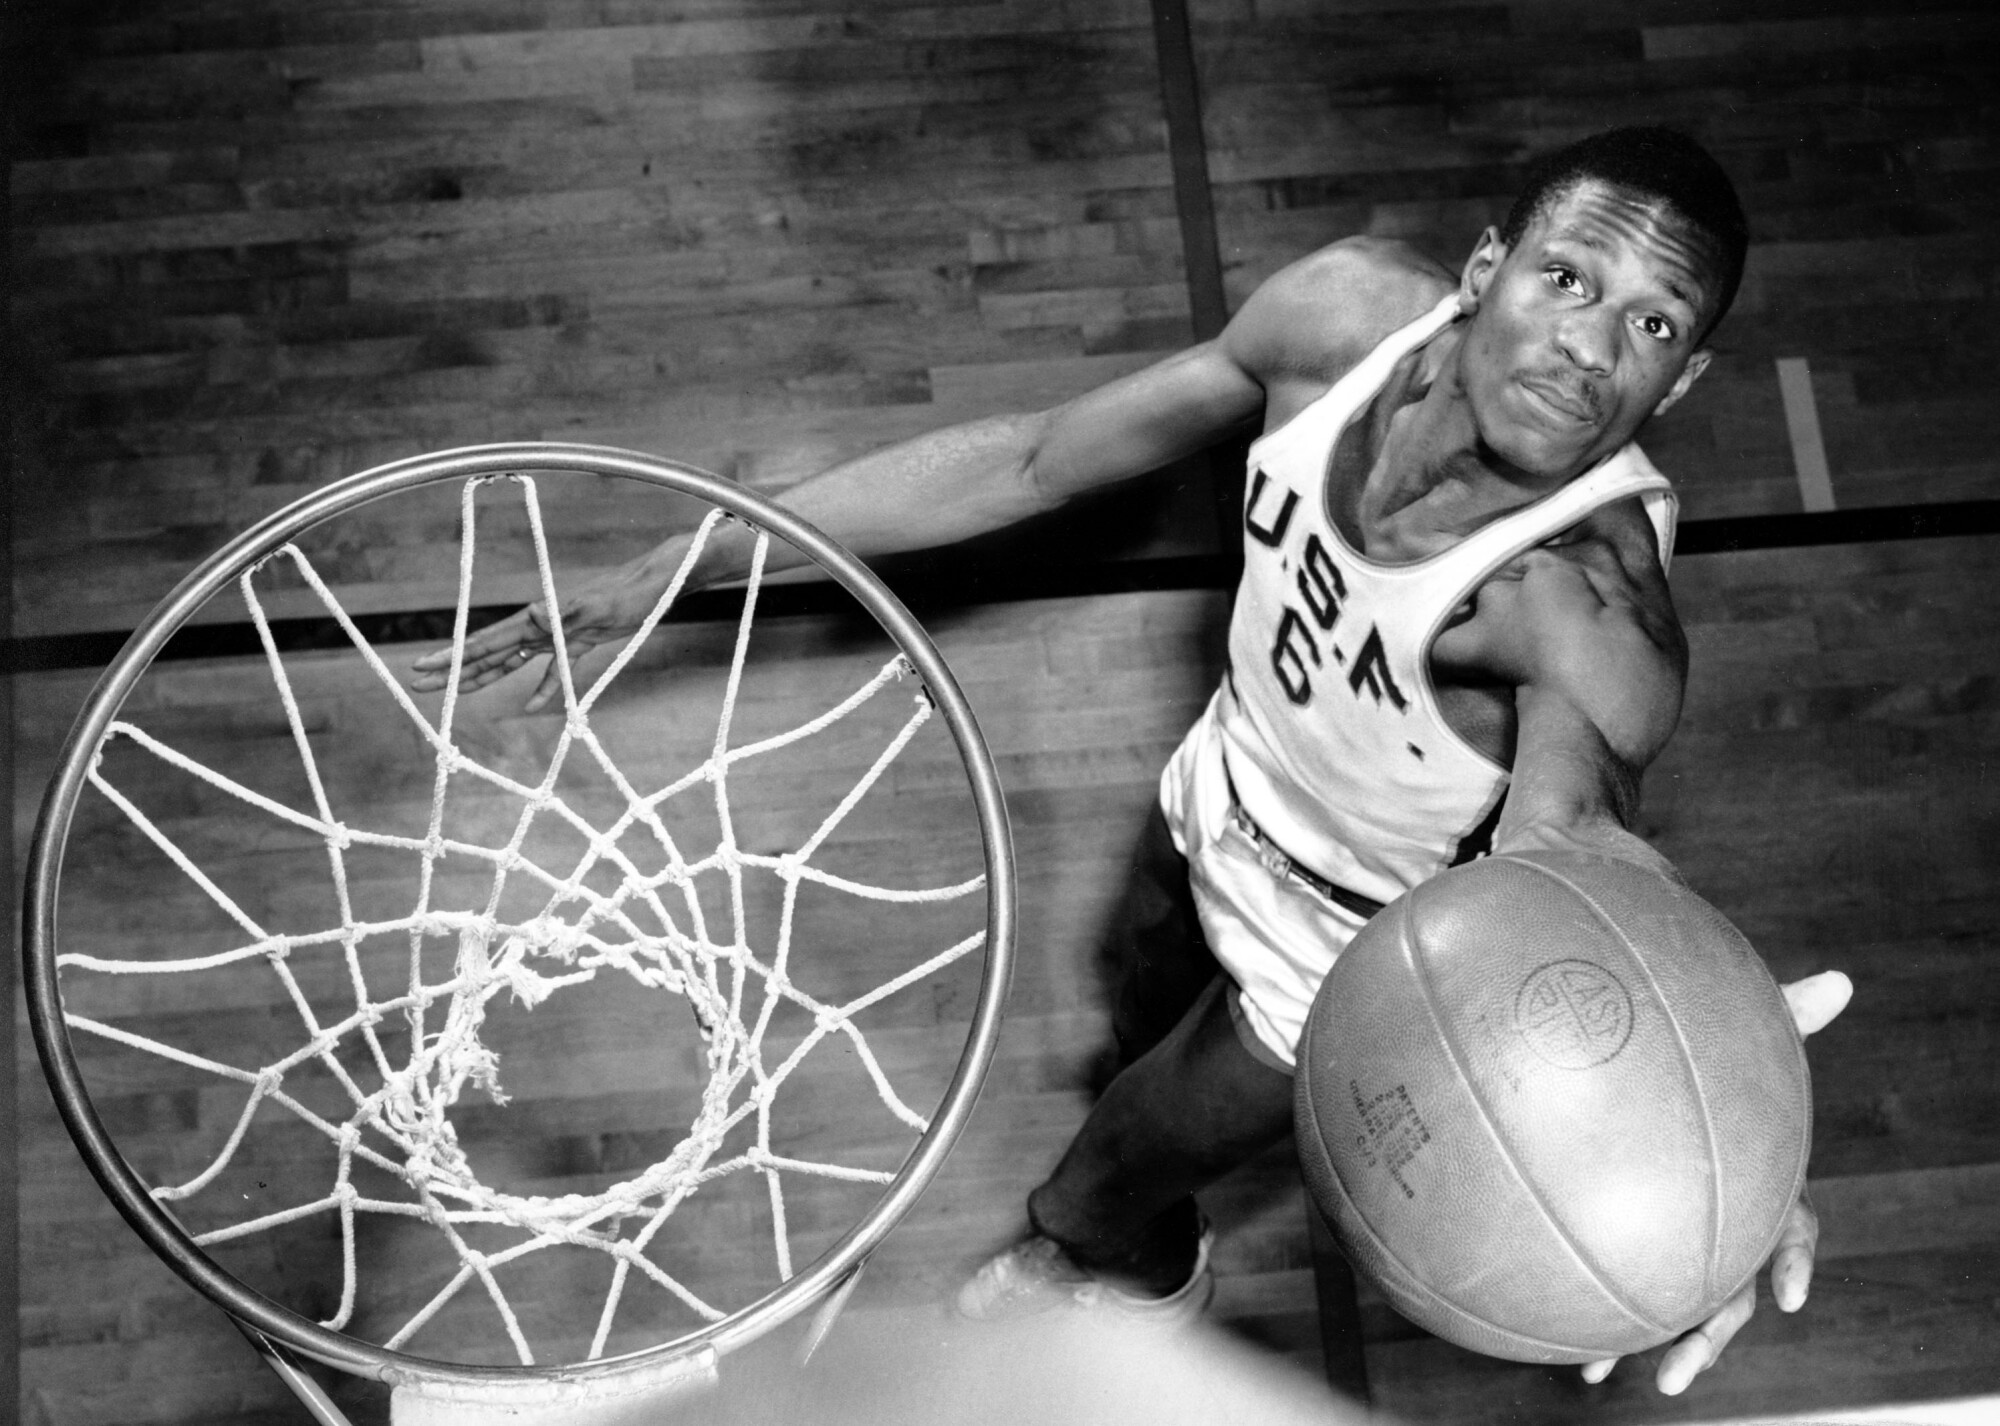 Bill Russell shoots a layup during a photo session at the University of San Francisco.